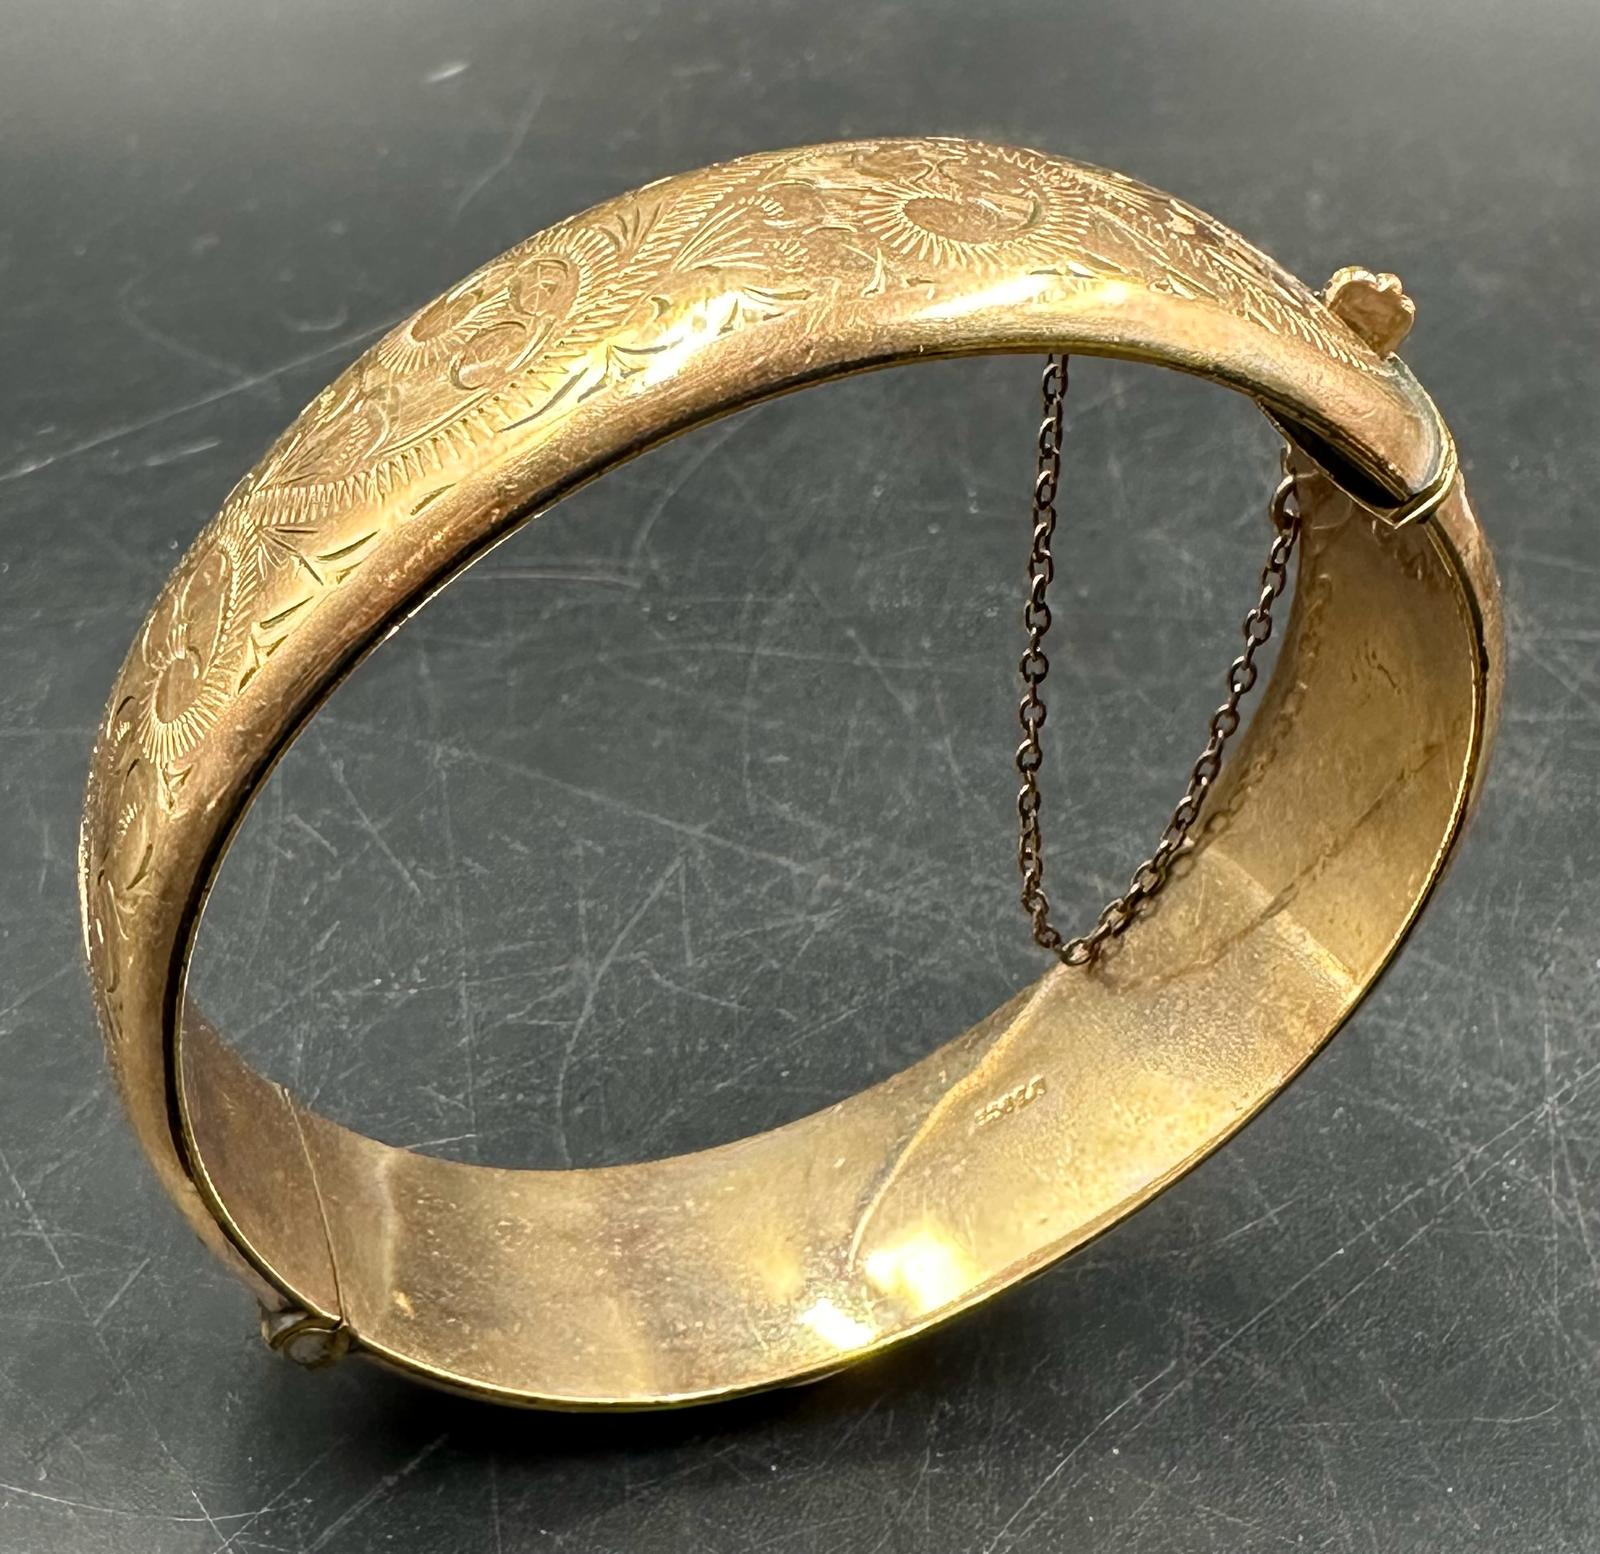 A 1/5 9ct rolled gold bangle engraved on a scrolling pattern - Image 5 of 8